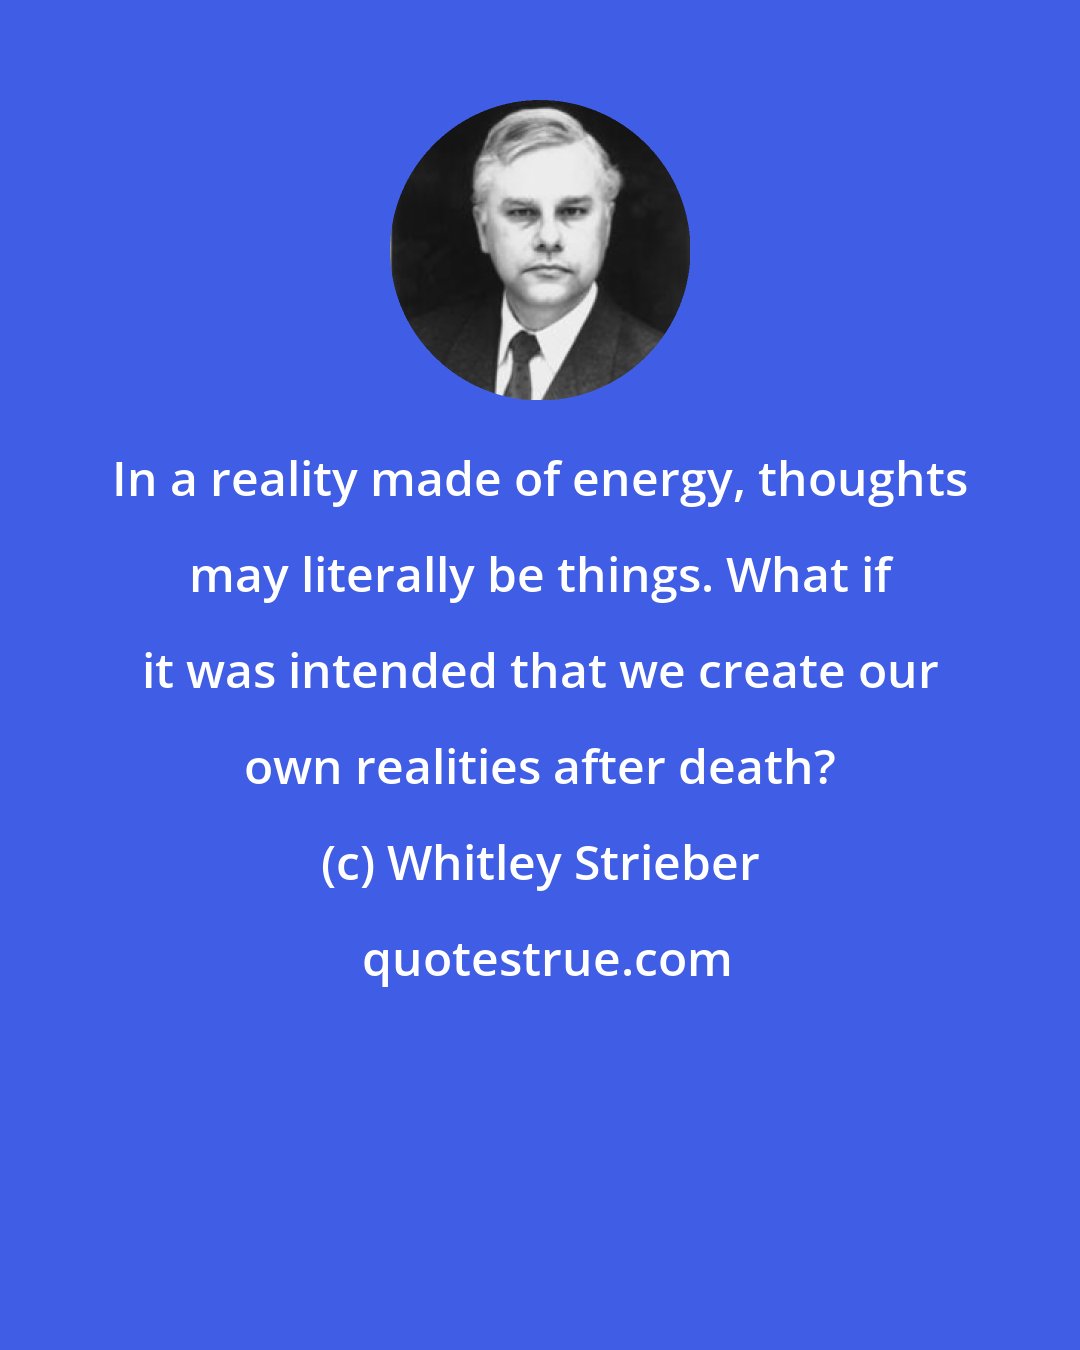 Whitley Strieber: In a reality made of energy, thoughts may literally be things. What if it was intended that we create our own realities after death?